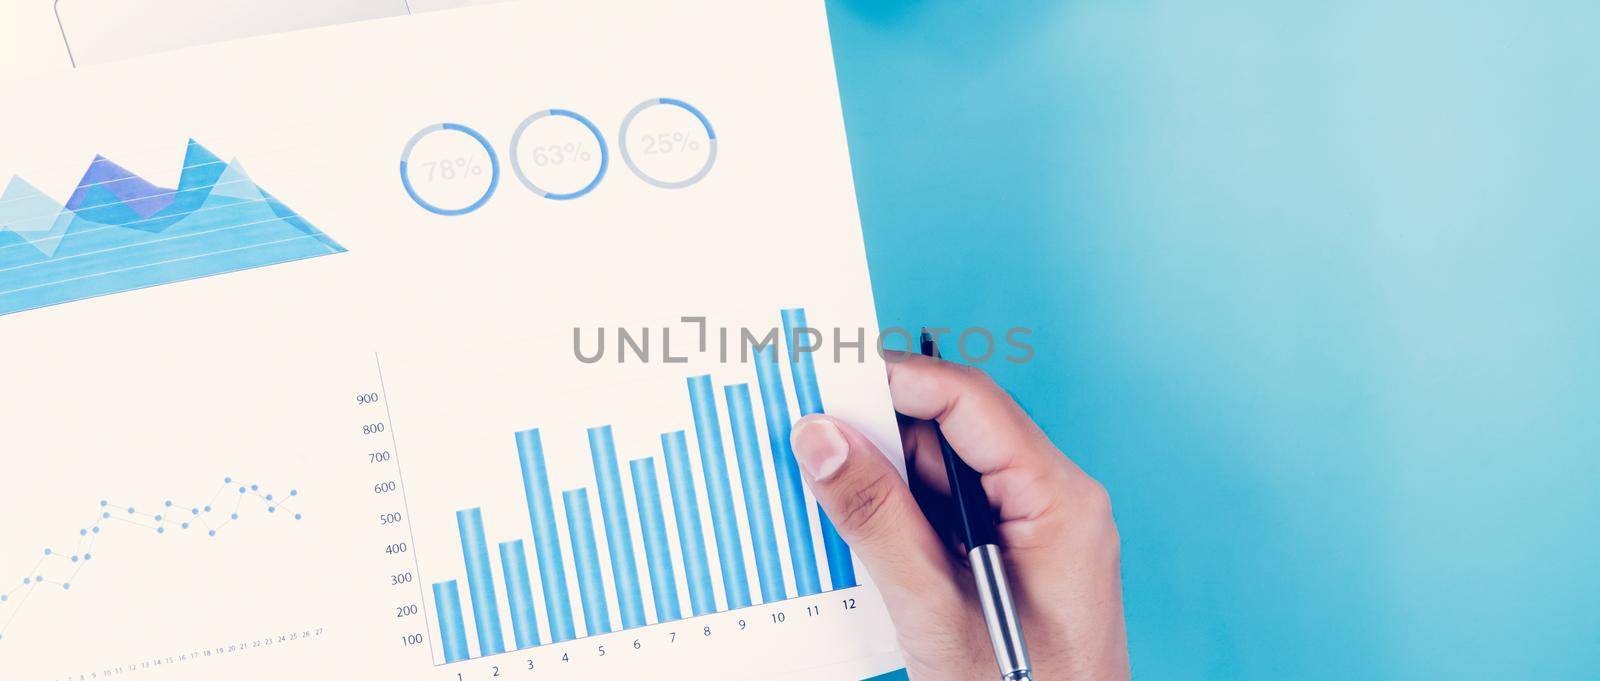 Hand of businessman holding documents report statistic financial with graph and chart and laptop computer and coffee on desk, finance and invest, digital marketing, business and communication concept. by nnudoo